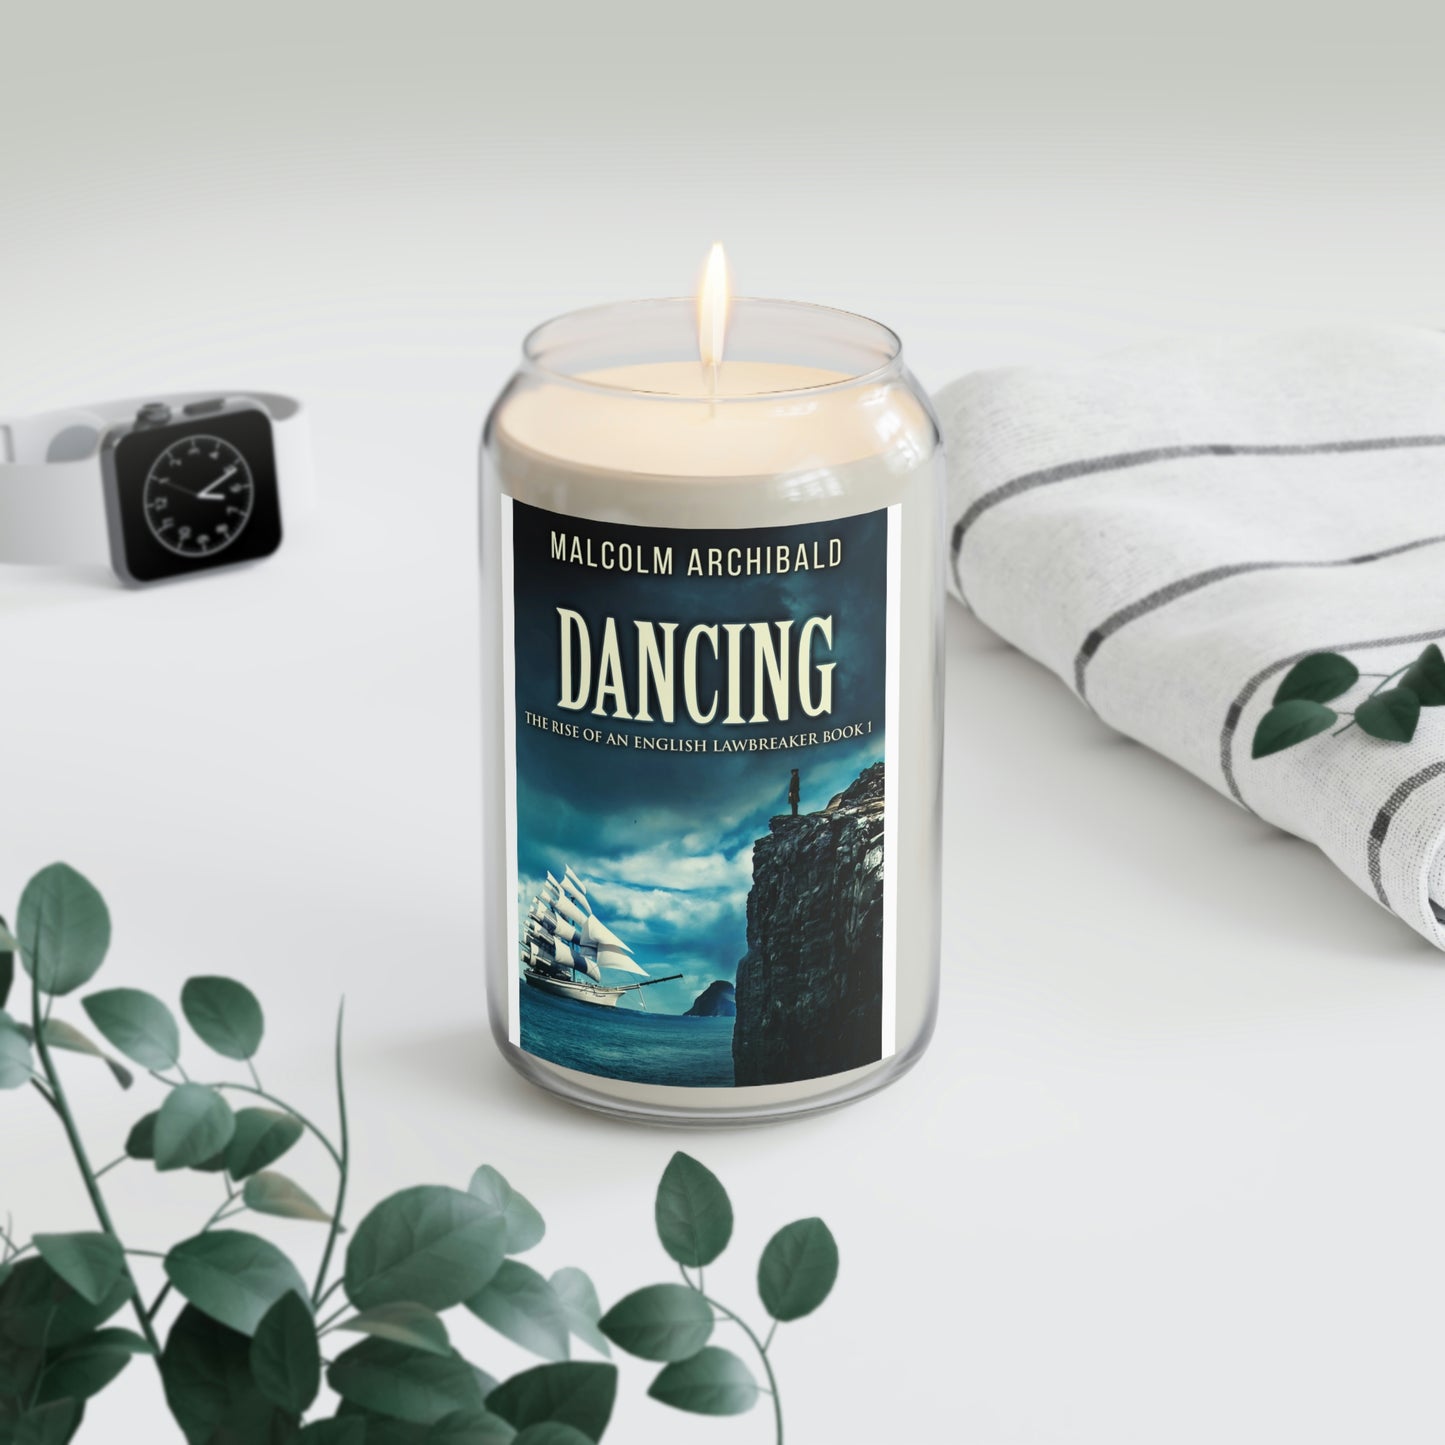 Dancing - Scented Candle